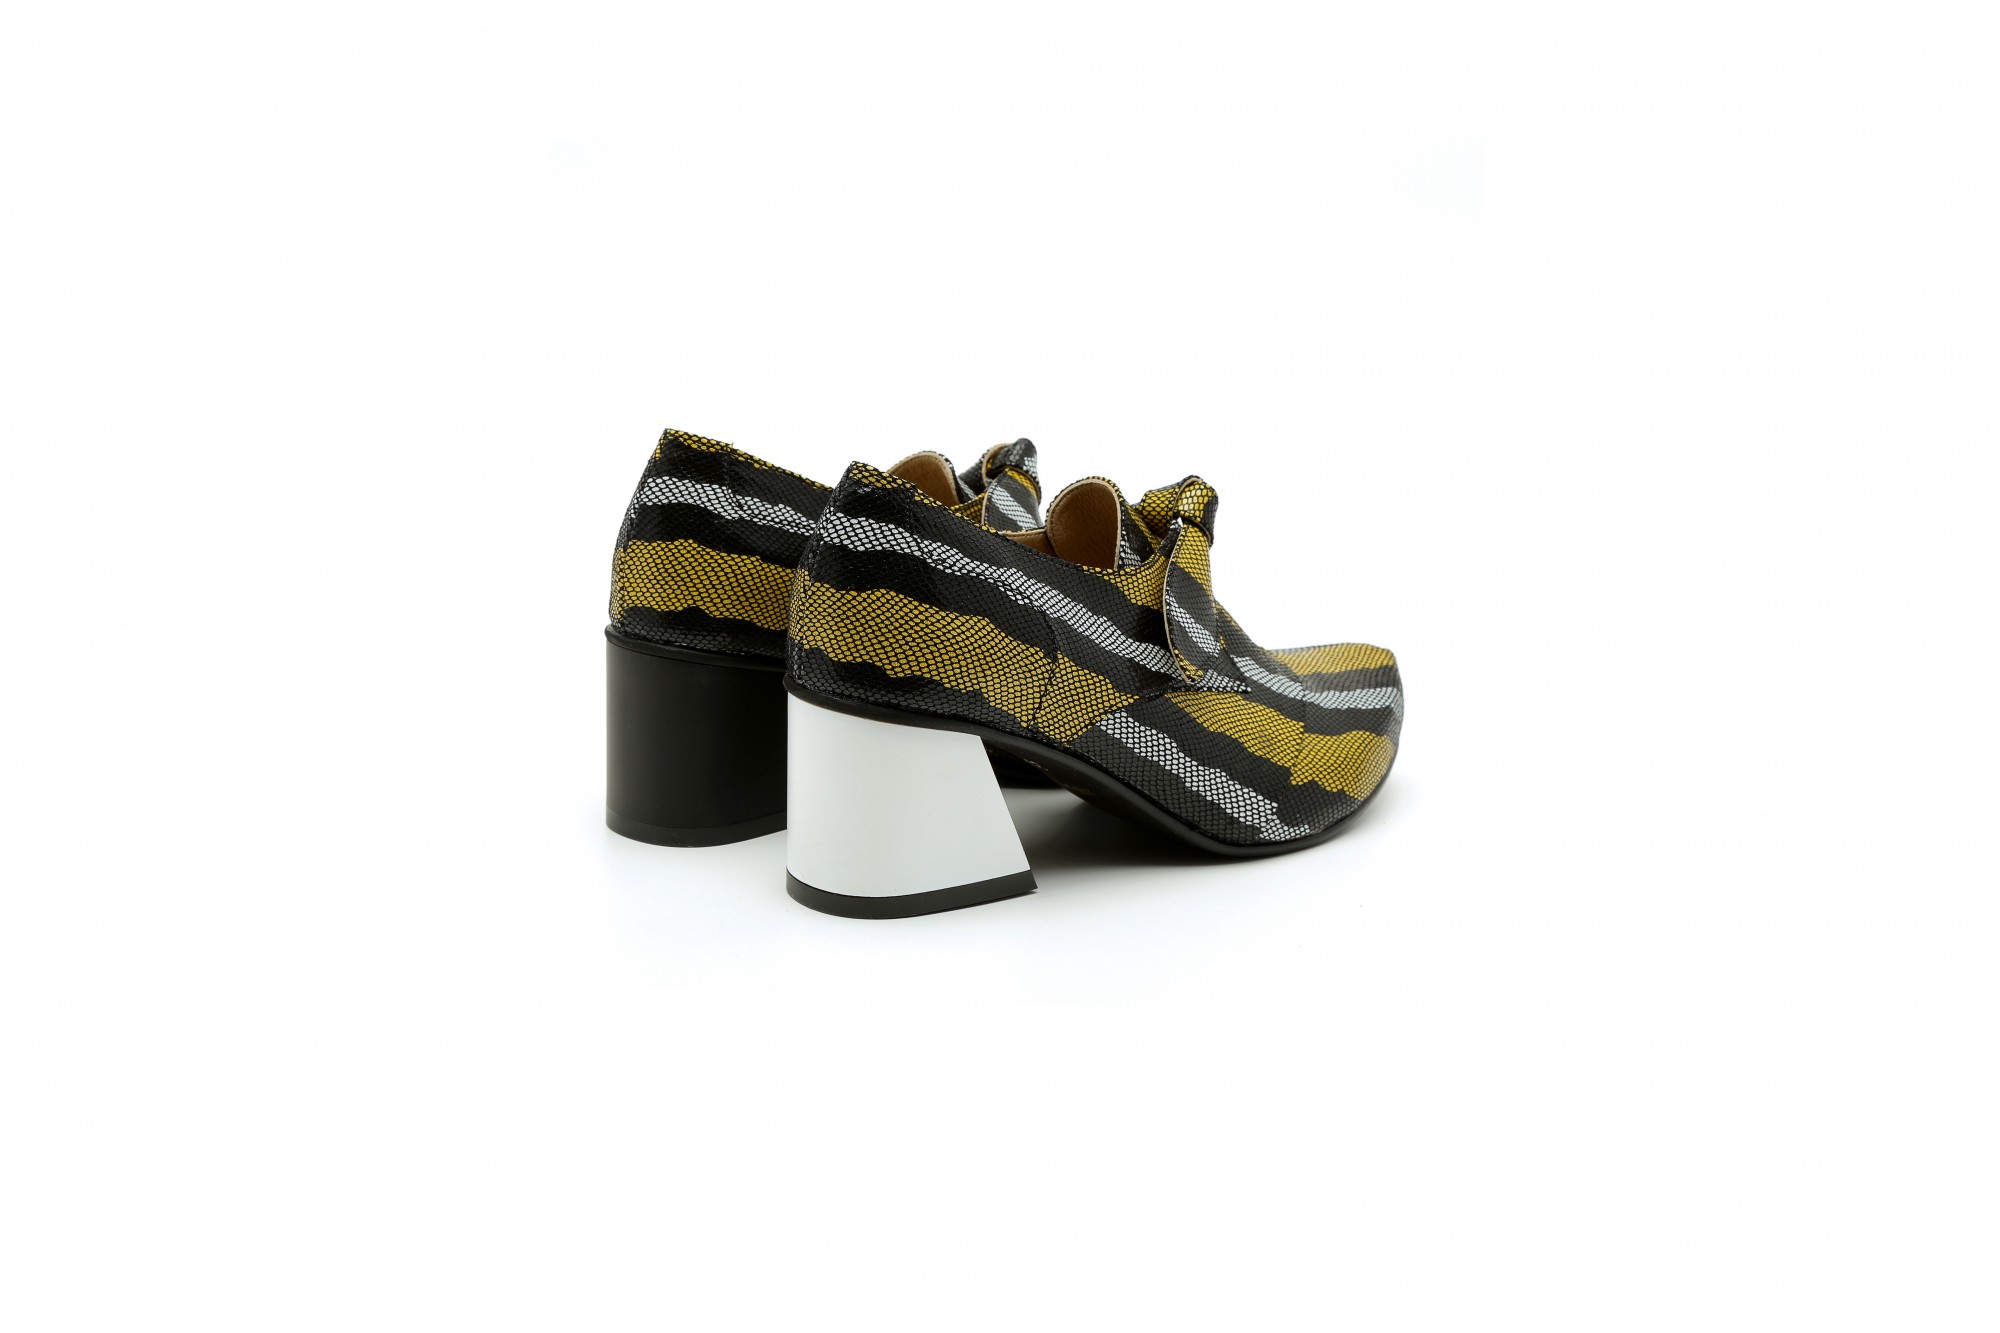 Block heel funky shoes black and yellow